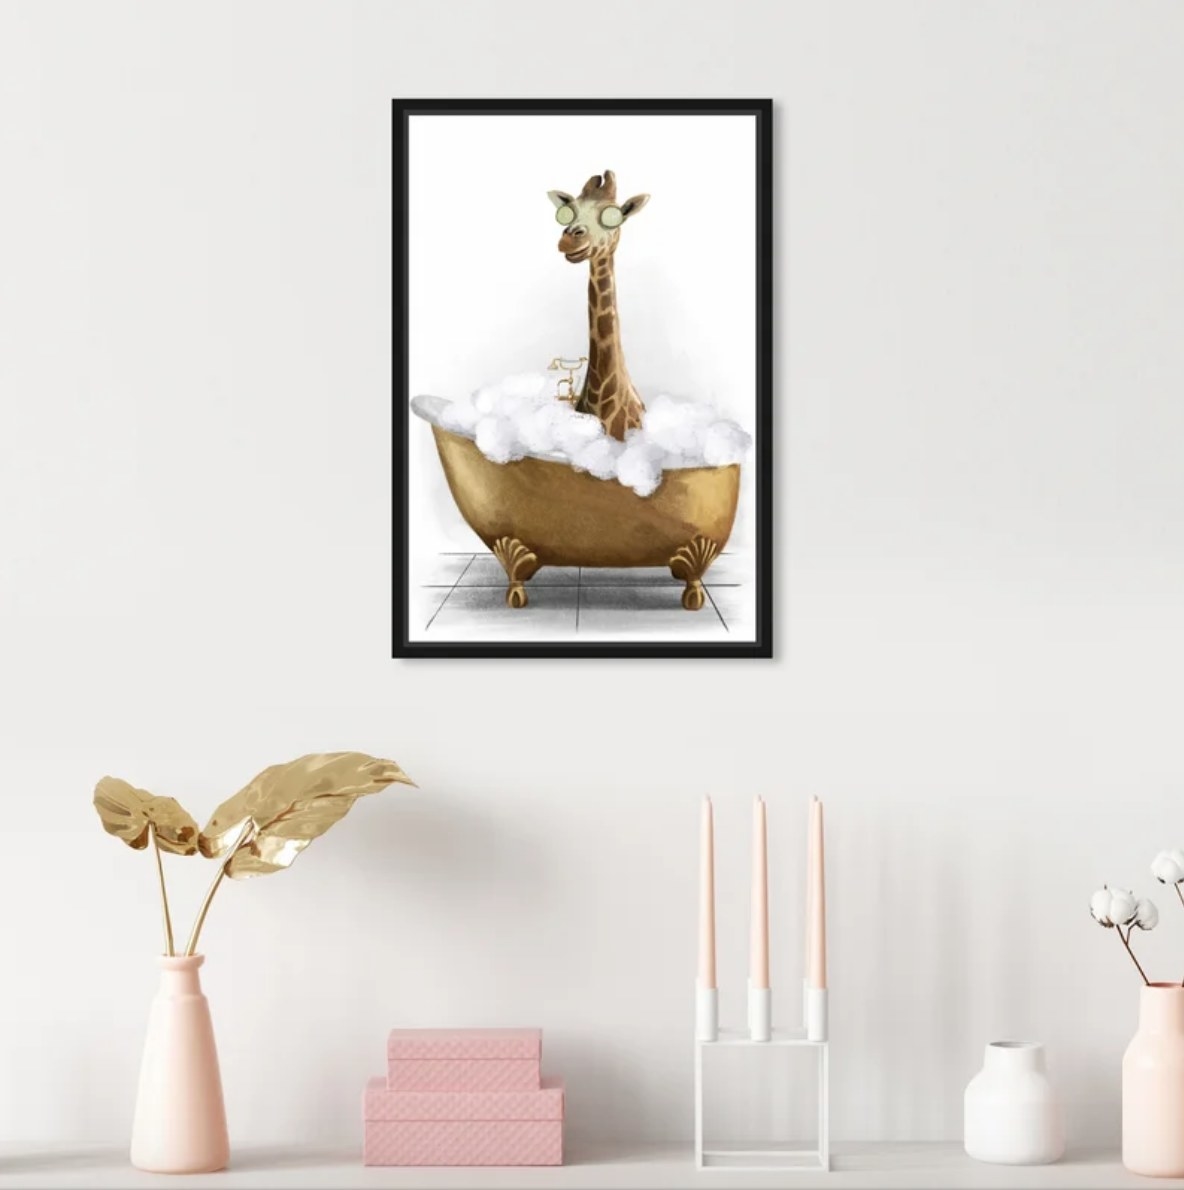 Picture of giraffe taking a bath on the wall above vases, boxes, candles